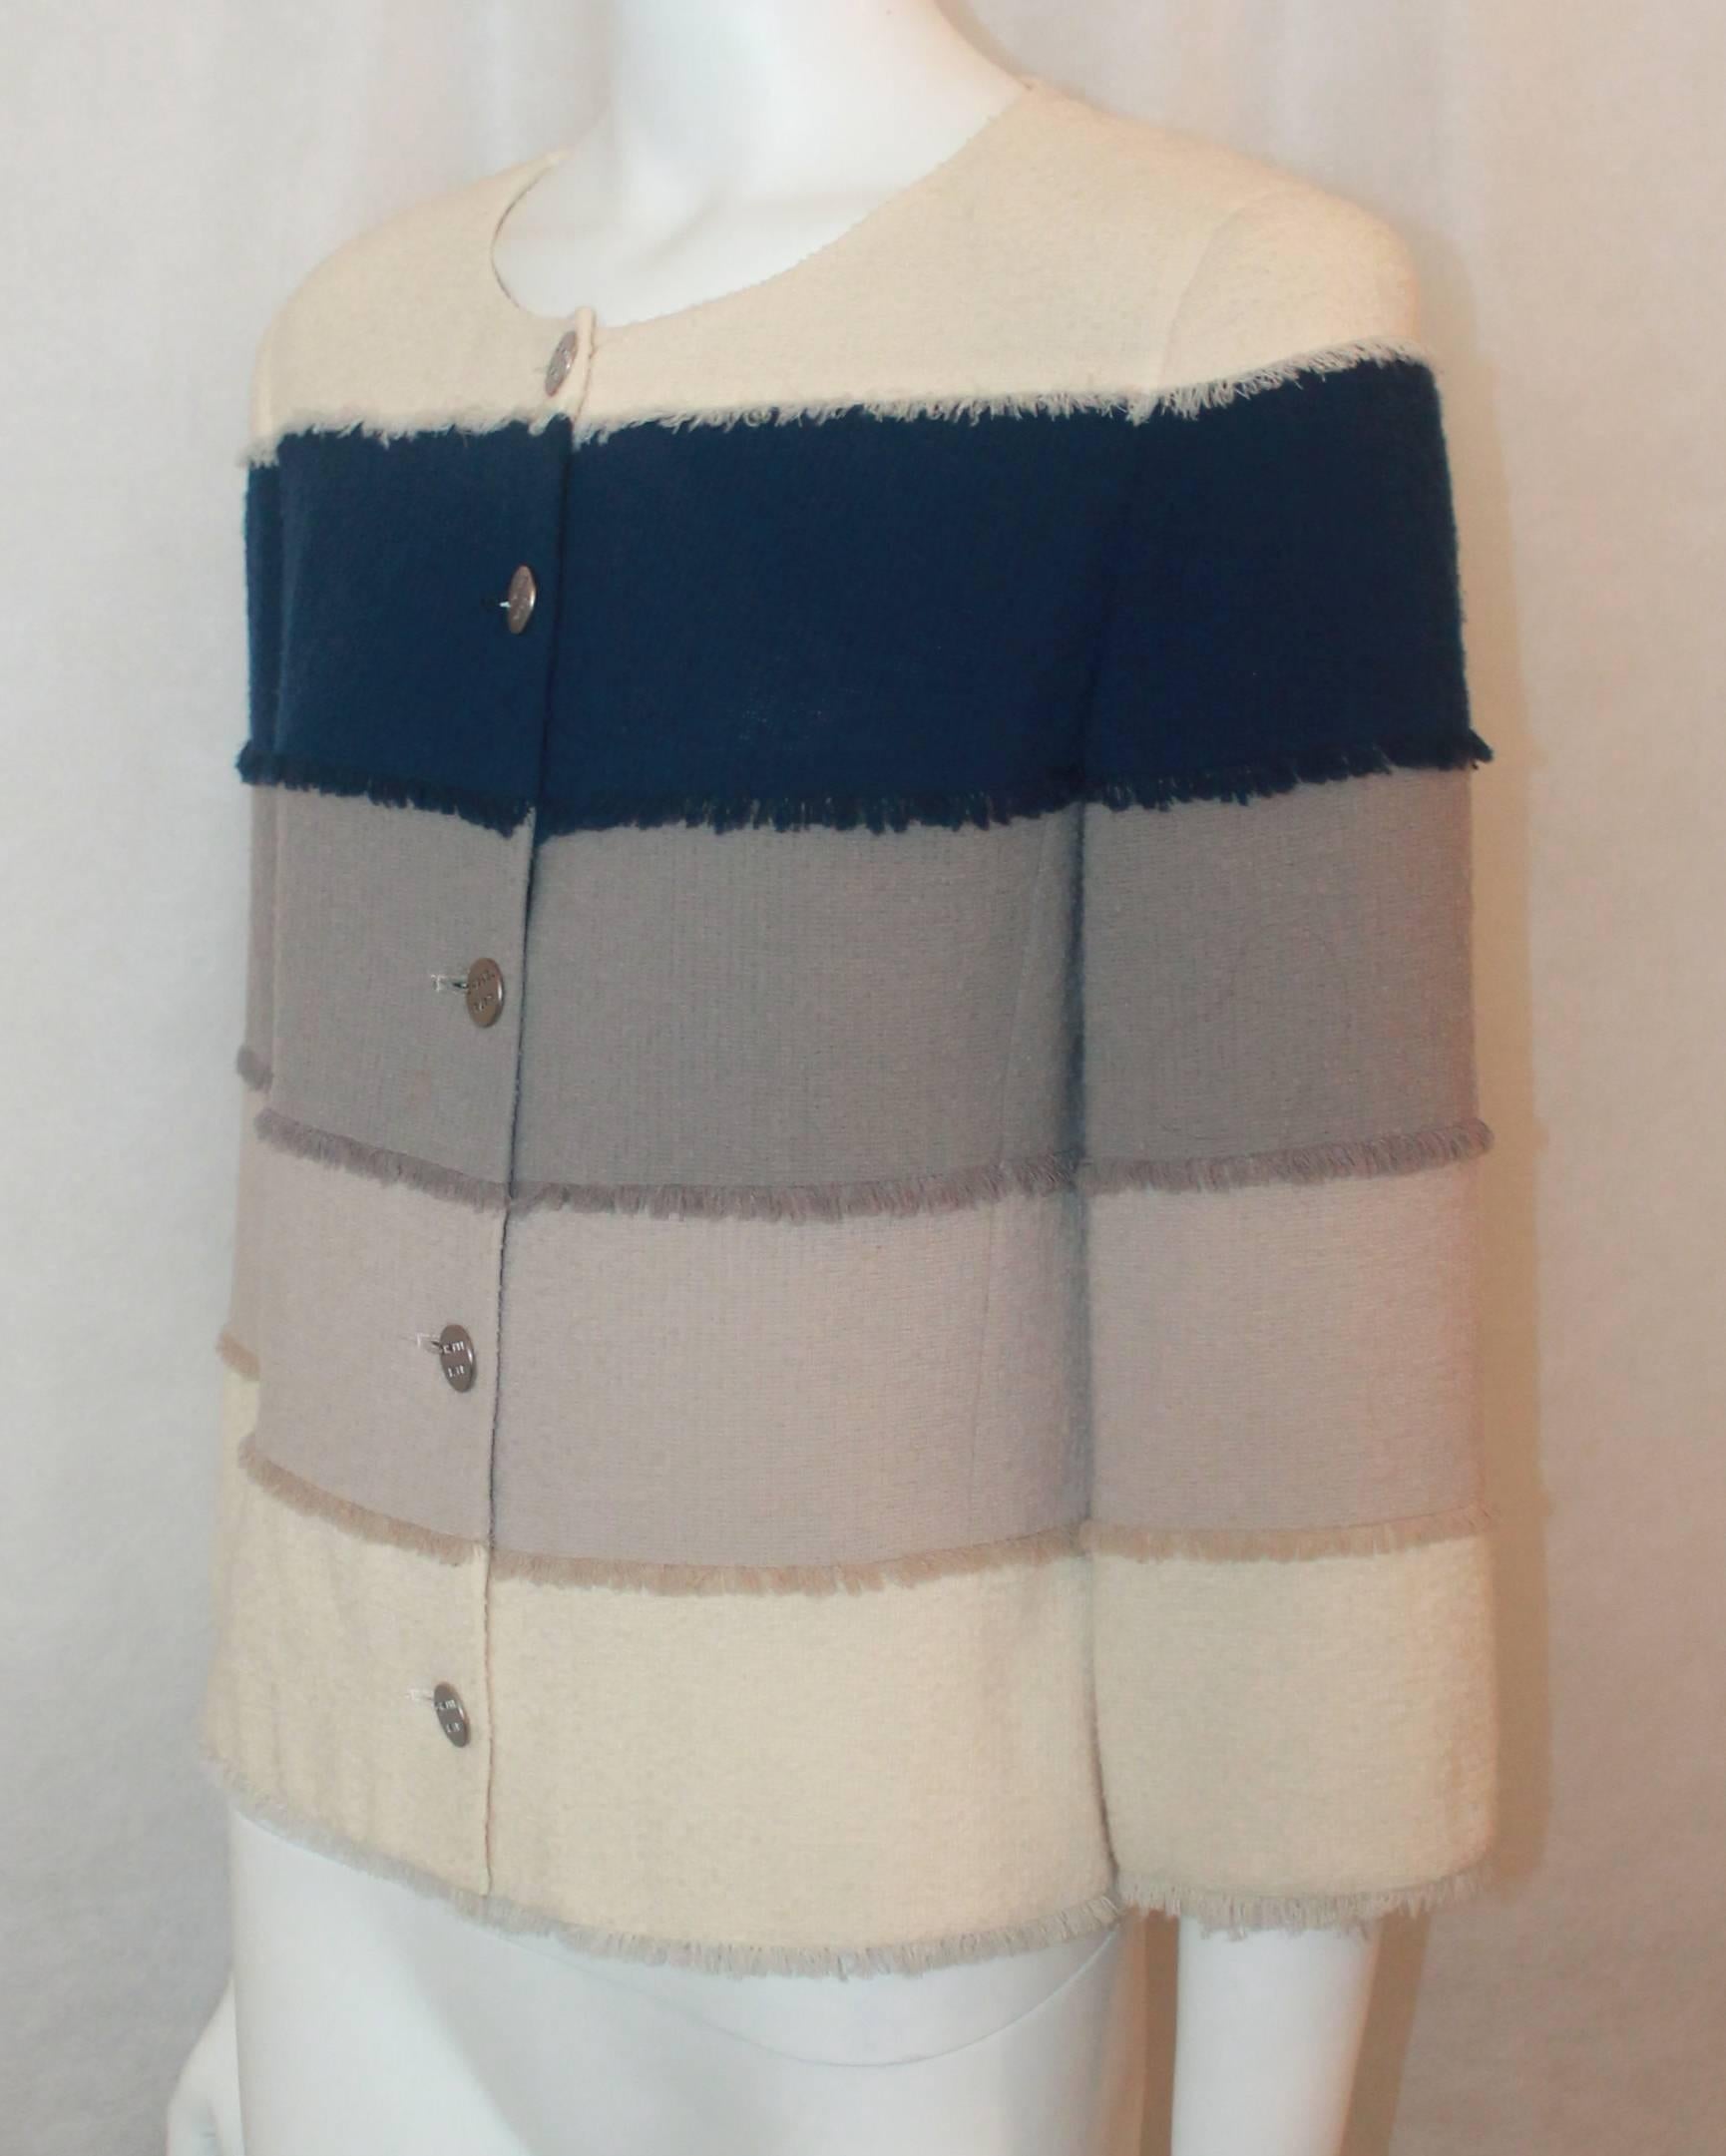 Chanel Earthtone & Blue Wool Blend Colorblock Jacket - 40 - 00C. This jacket is in very good condition with one very, very slight stain in the front in image 6. It features thick horizontal stripes with a small fringe on the bottom, silver 